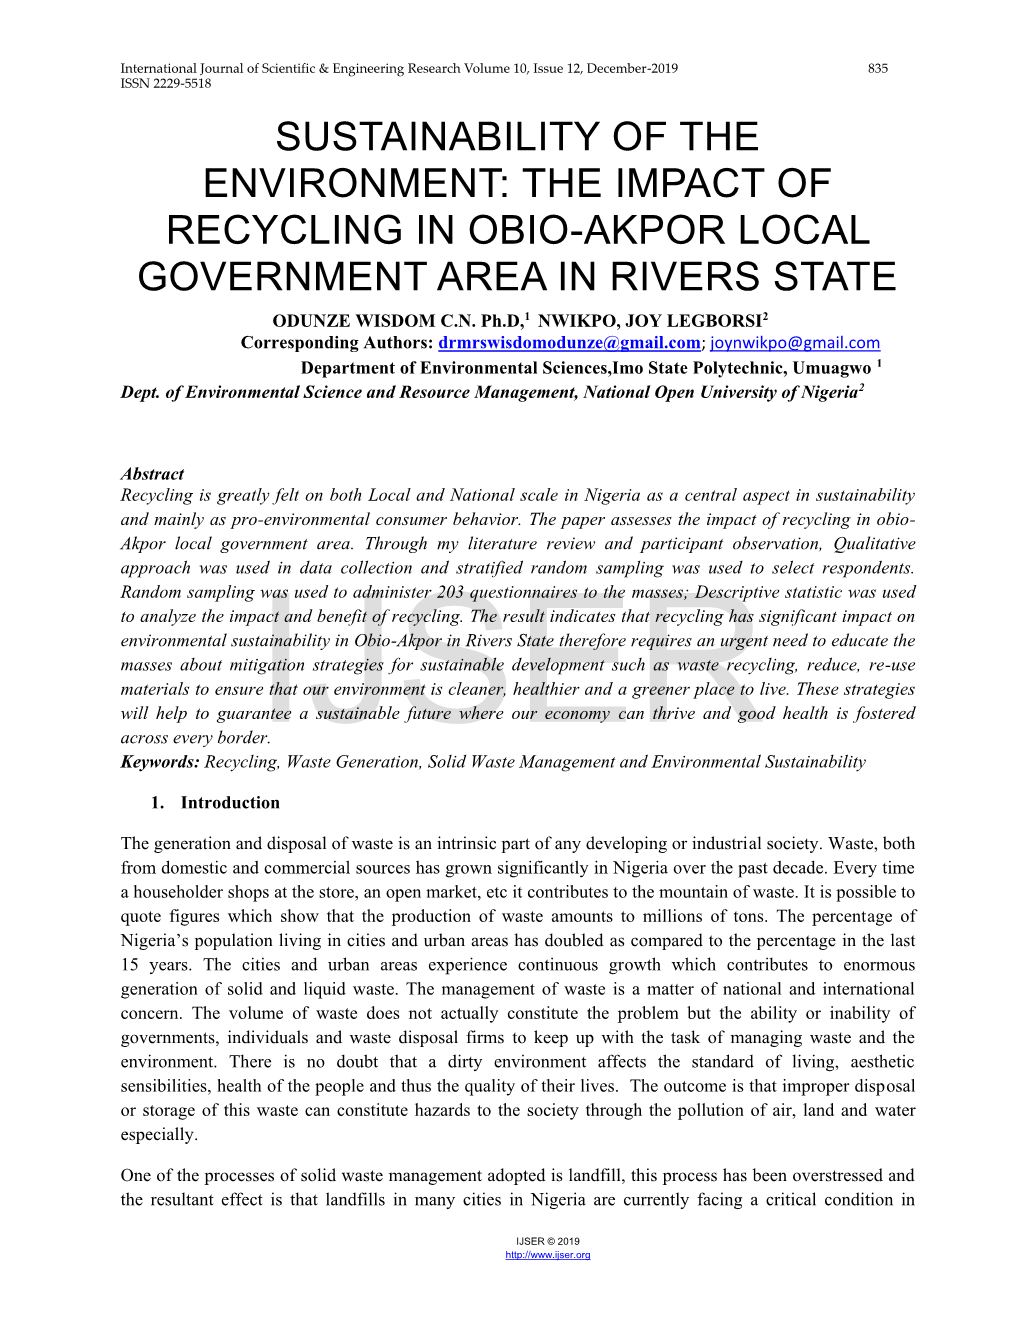 Sustainability of the Environment: the Impact of Recycling in Obio-Akpor Local Government Area in Rivers State Odunze Wisdom C.N